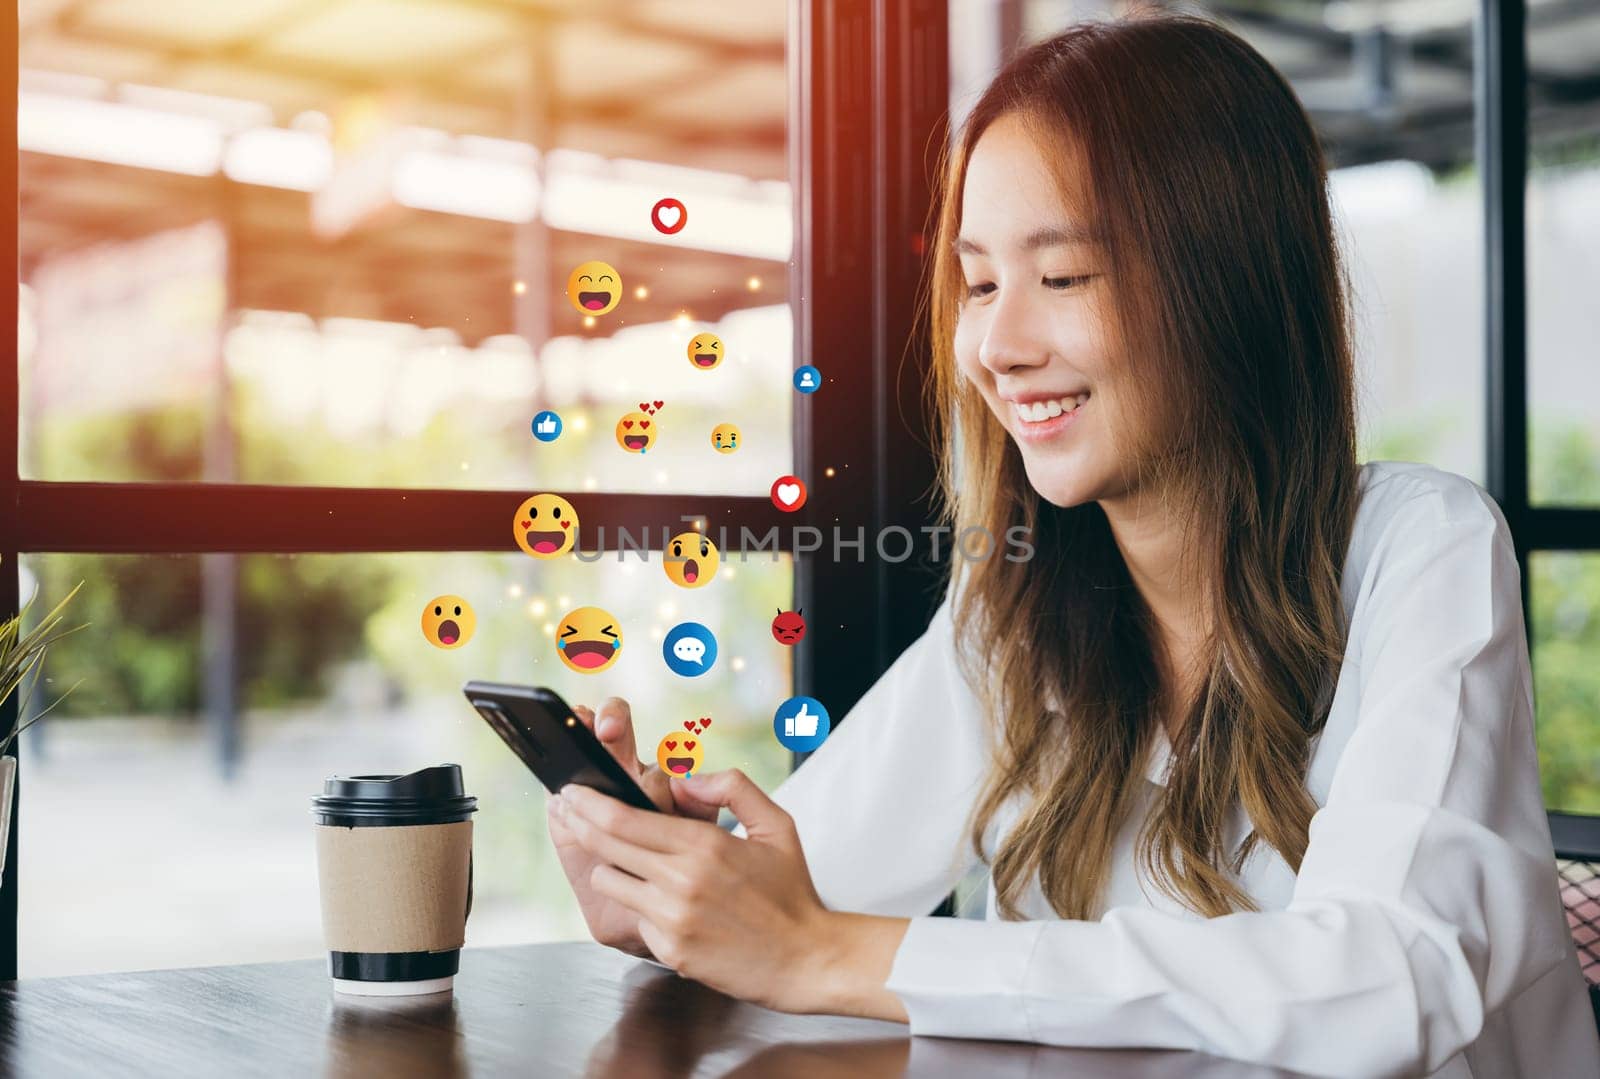 Asian woman using mobile phone, social media interaction concept with like, comment, and message icons above smartphone screen, Social media